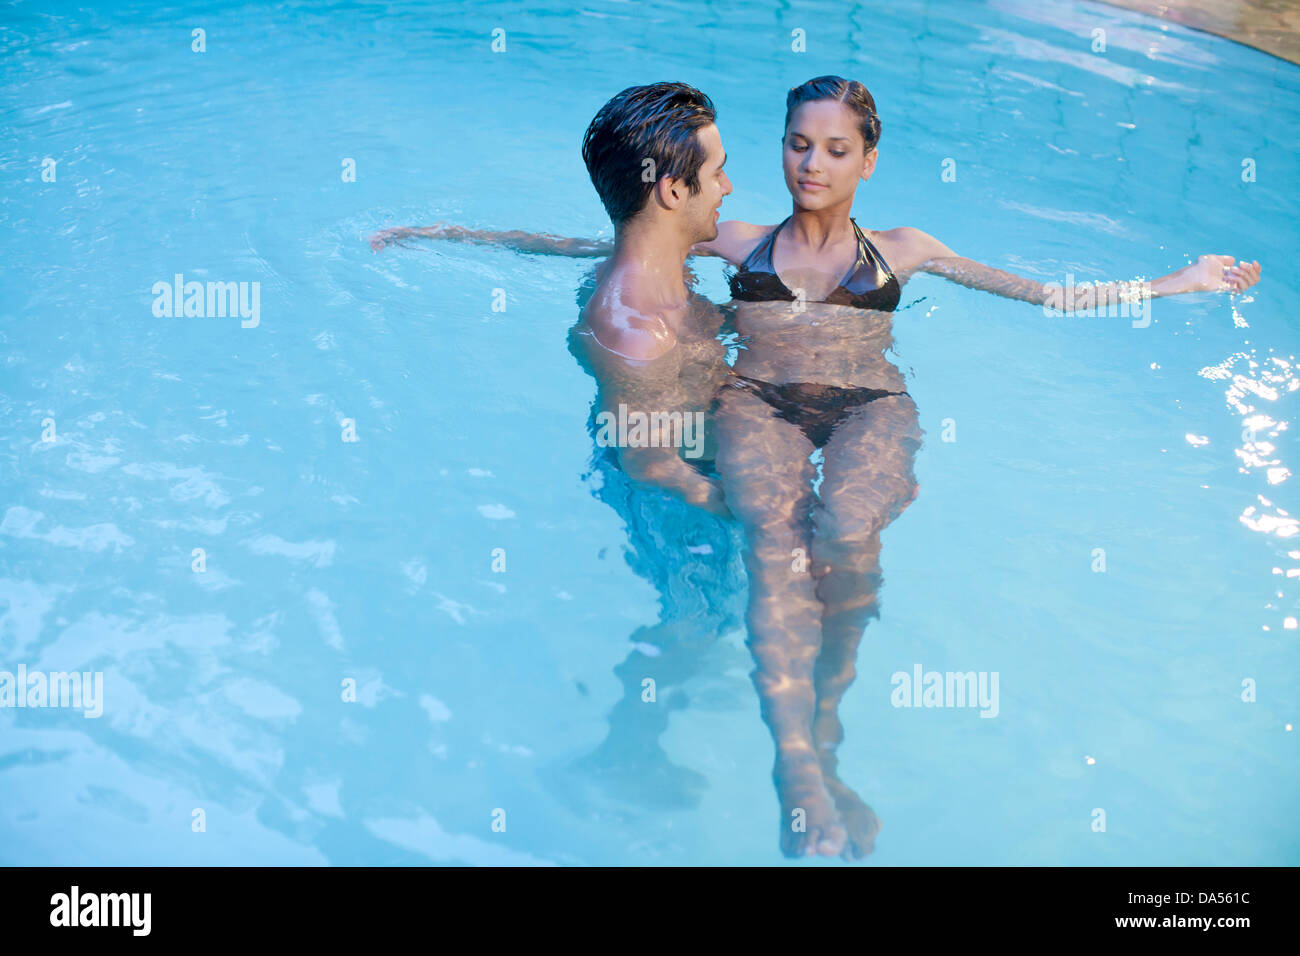 A couple in a swimming pool. Stock Photo